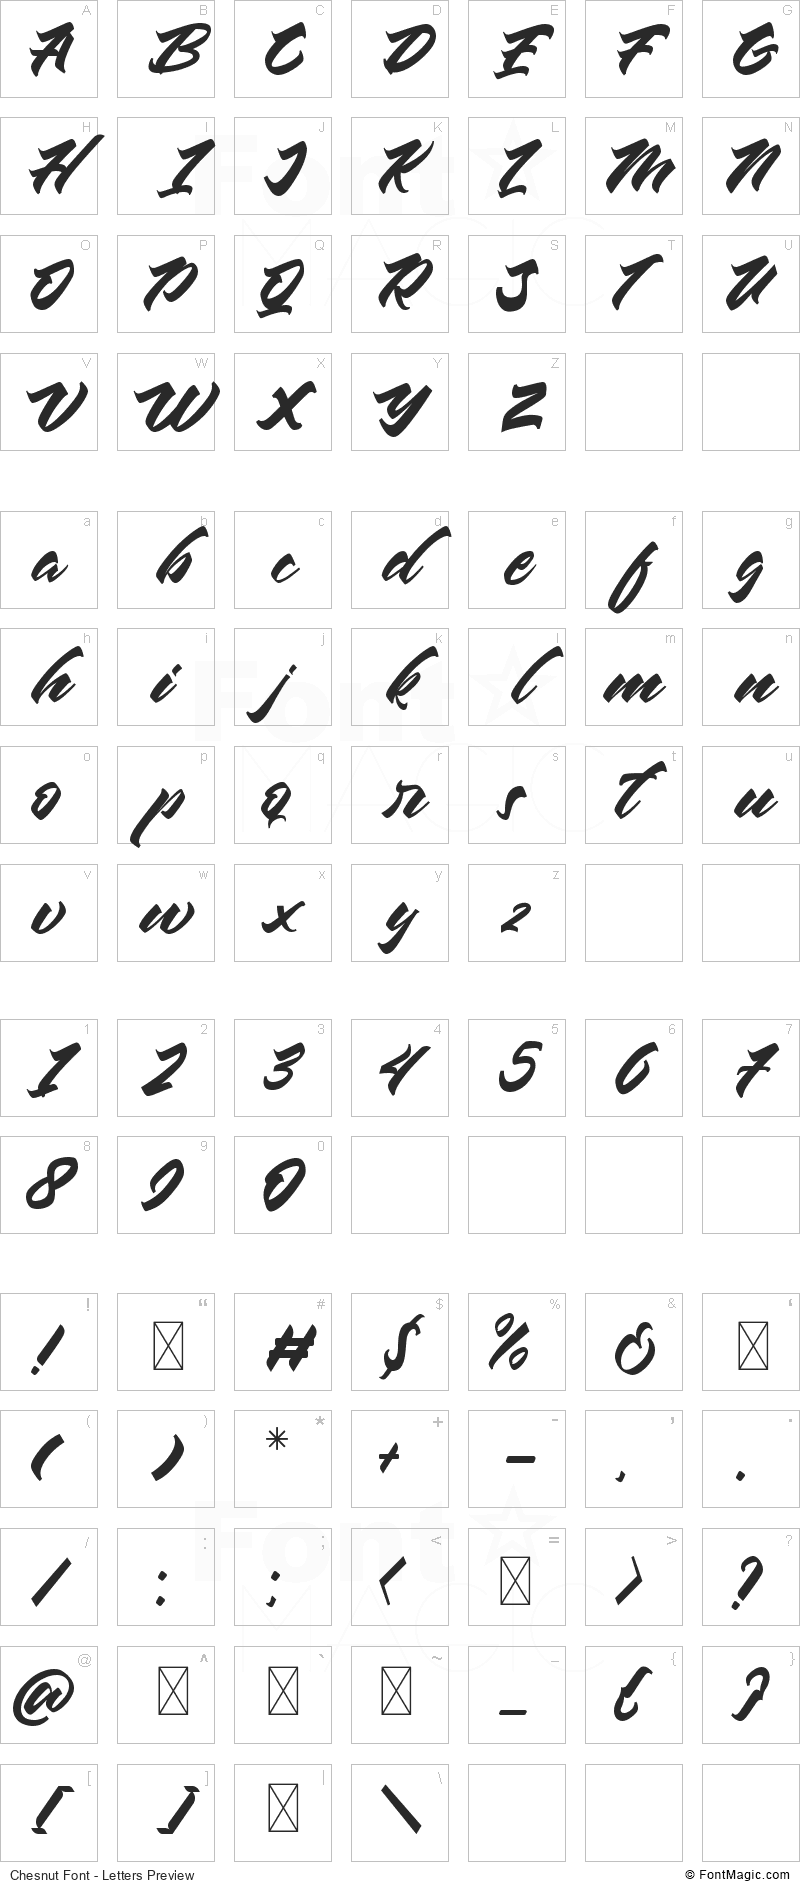 Chesnut Font - All Latters Preview Chart